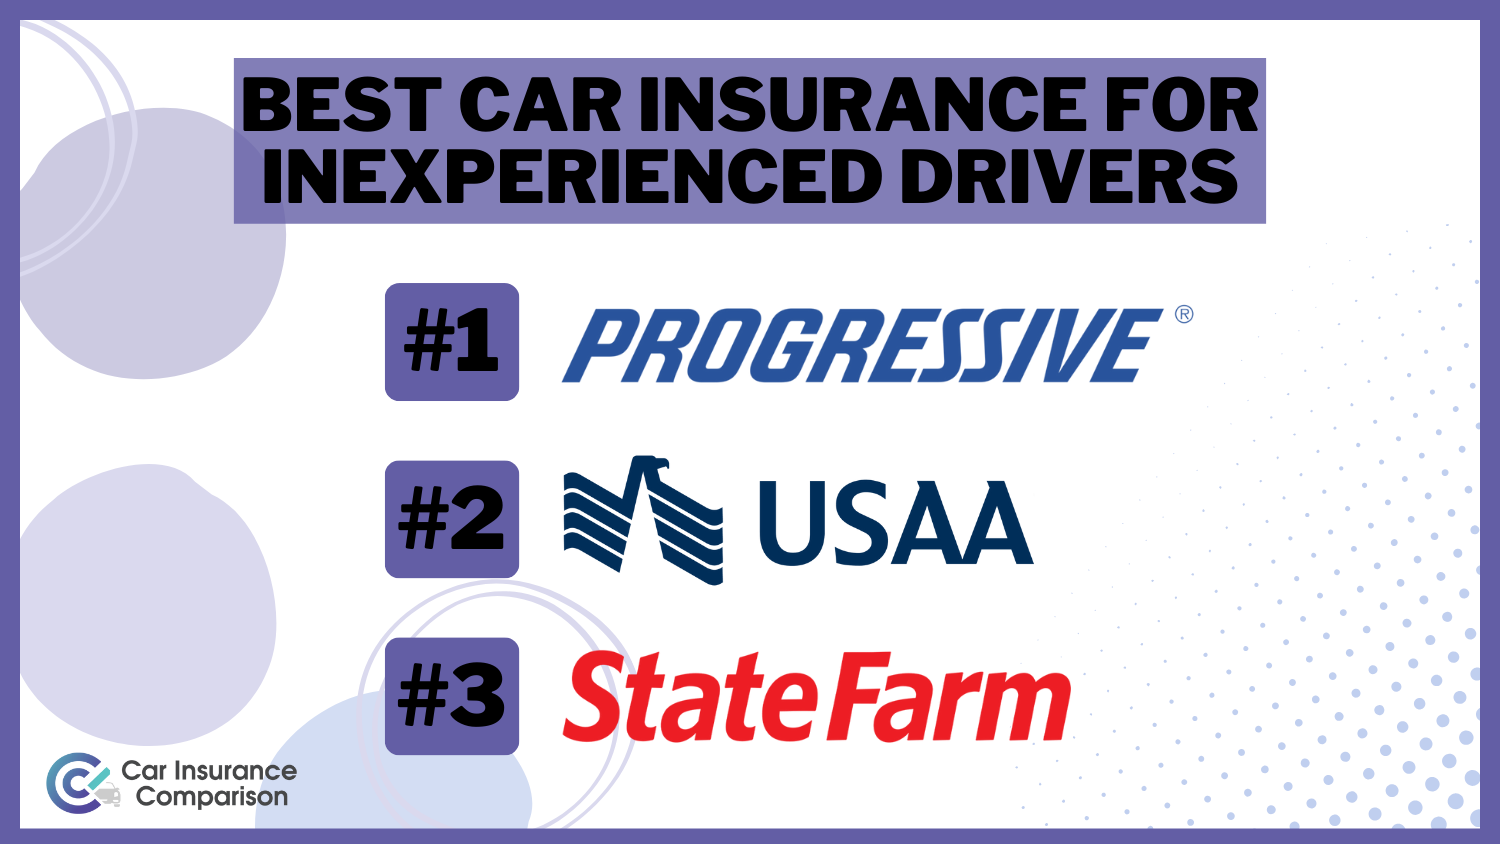 Best Car Insurance for Inexperienced Drivers: Progressive, USAA and State Farm